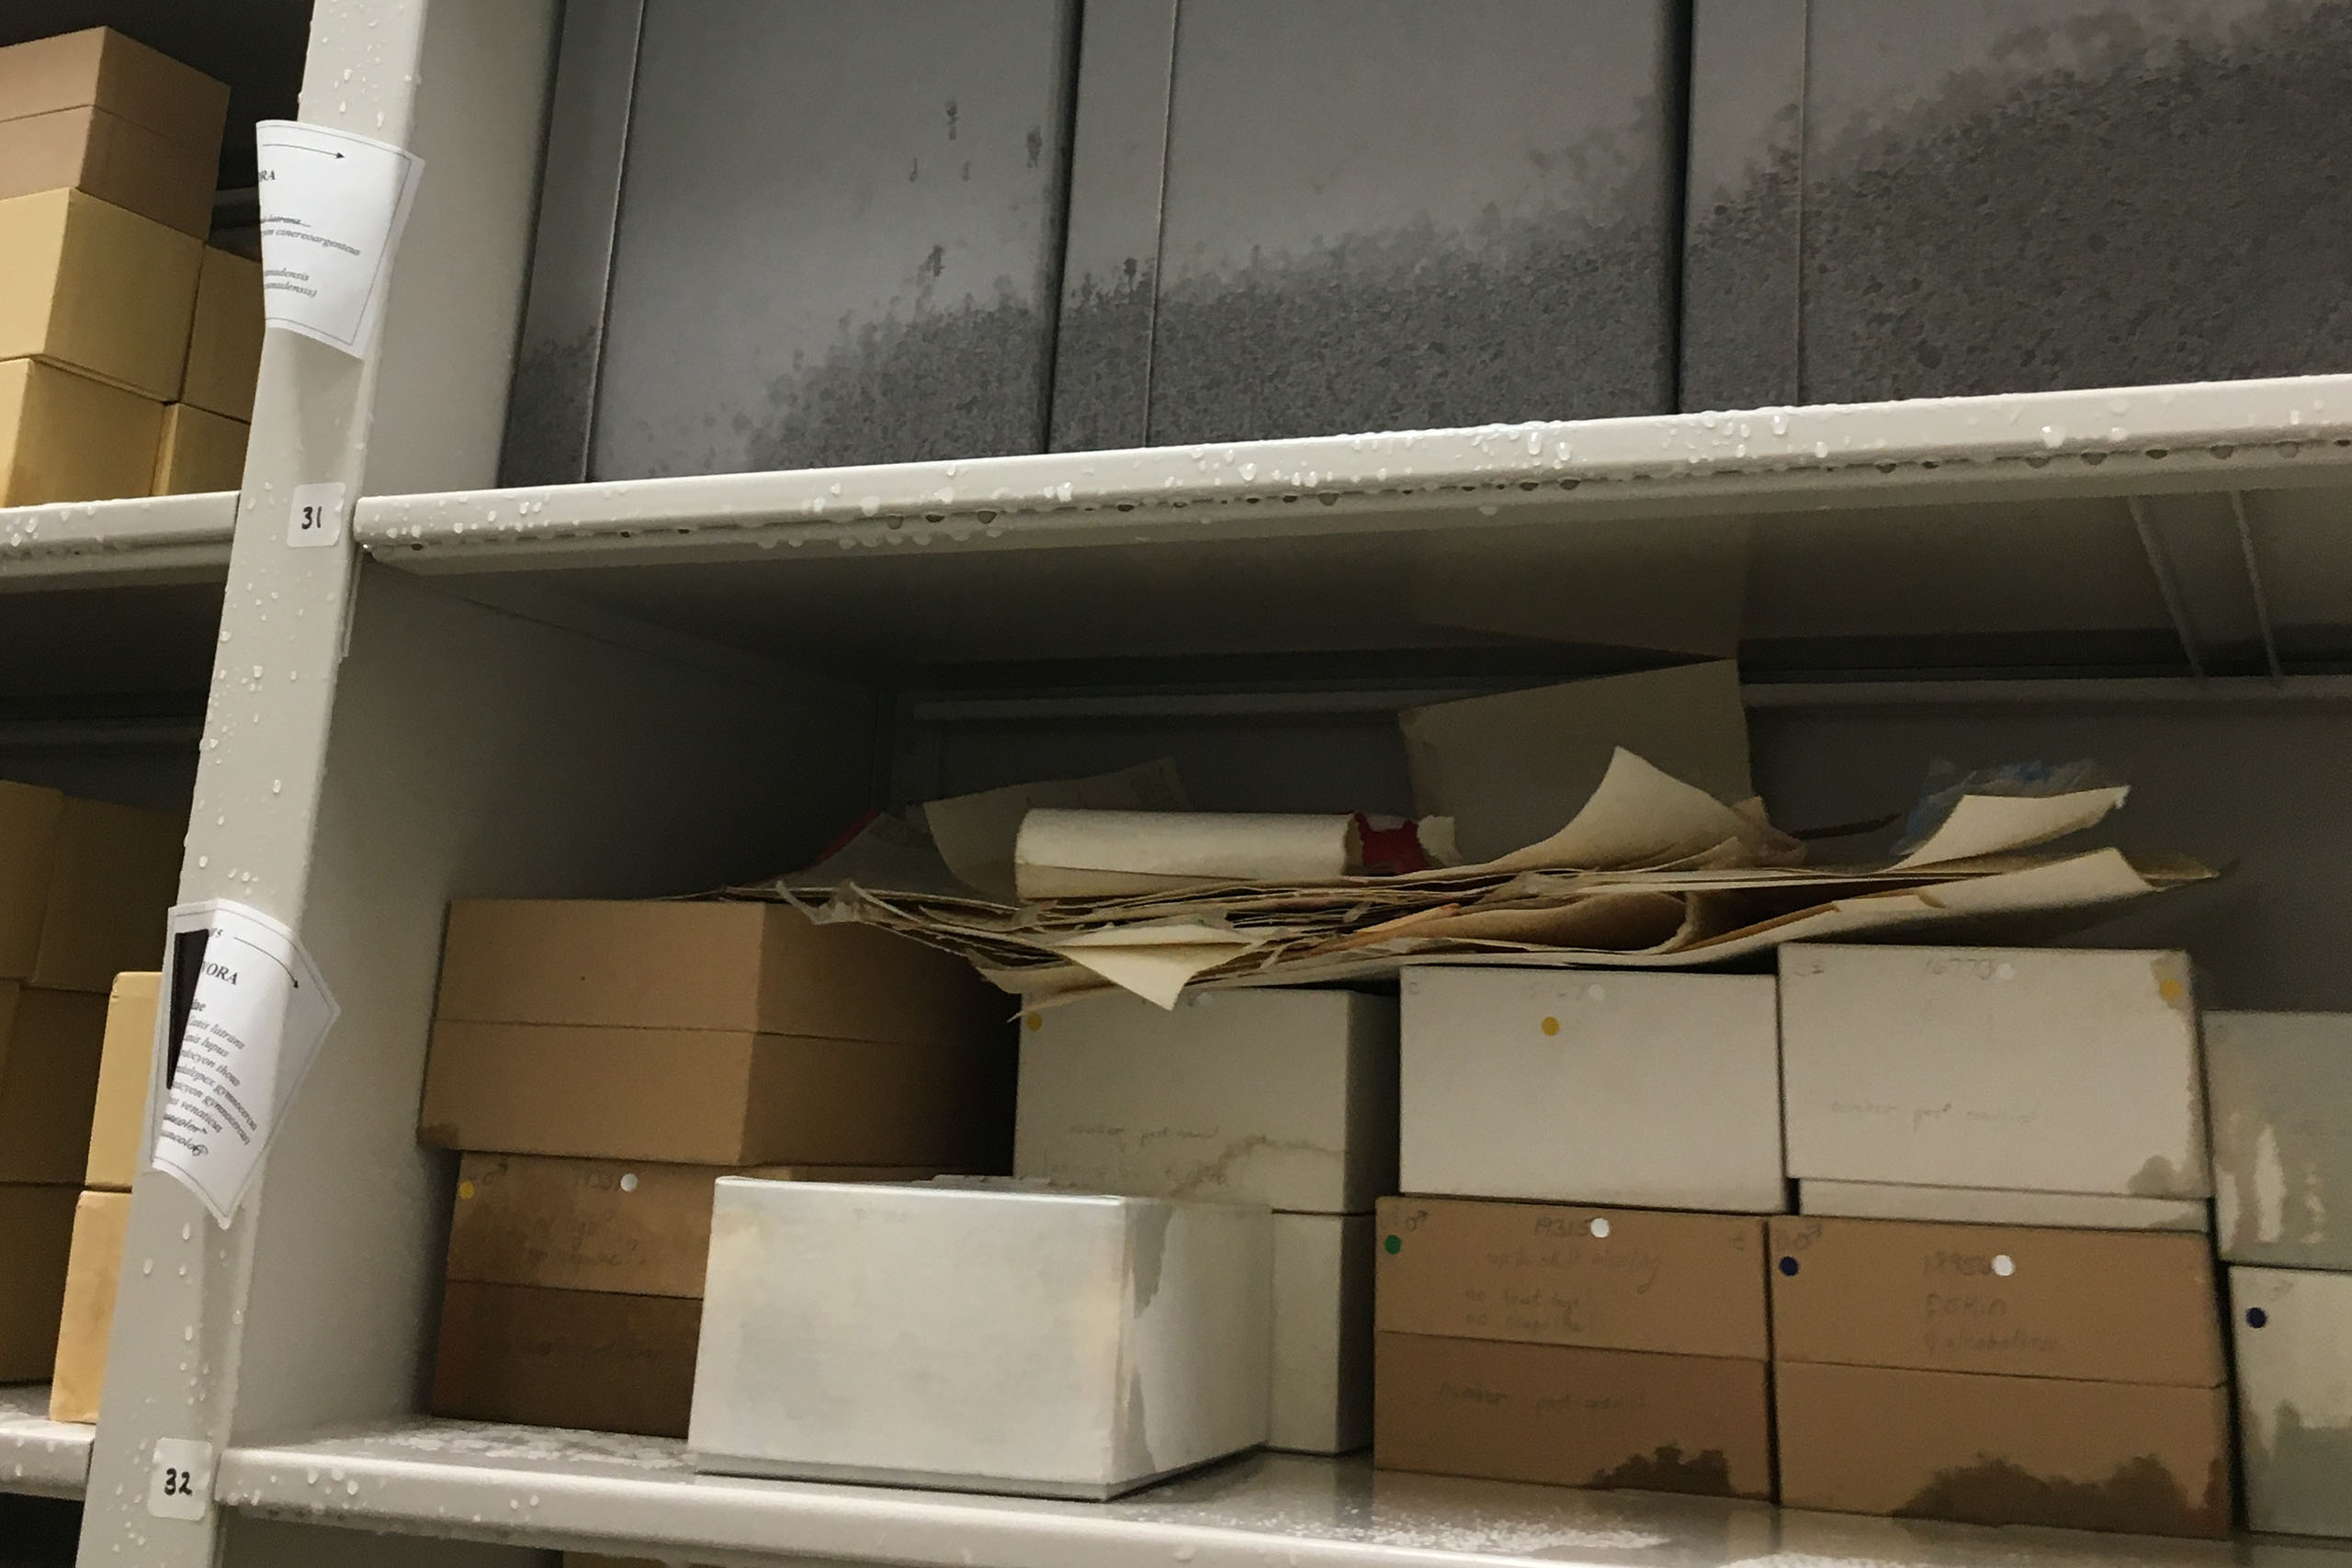 Visible water damage to boxes containing the mammal skeleton collection.